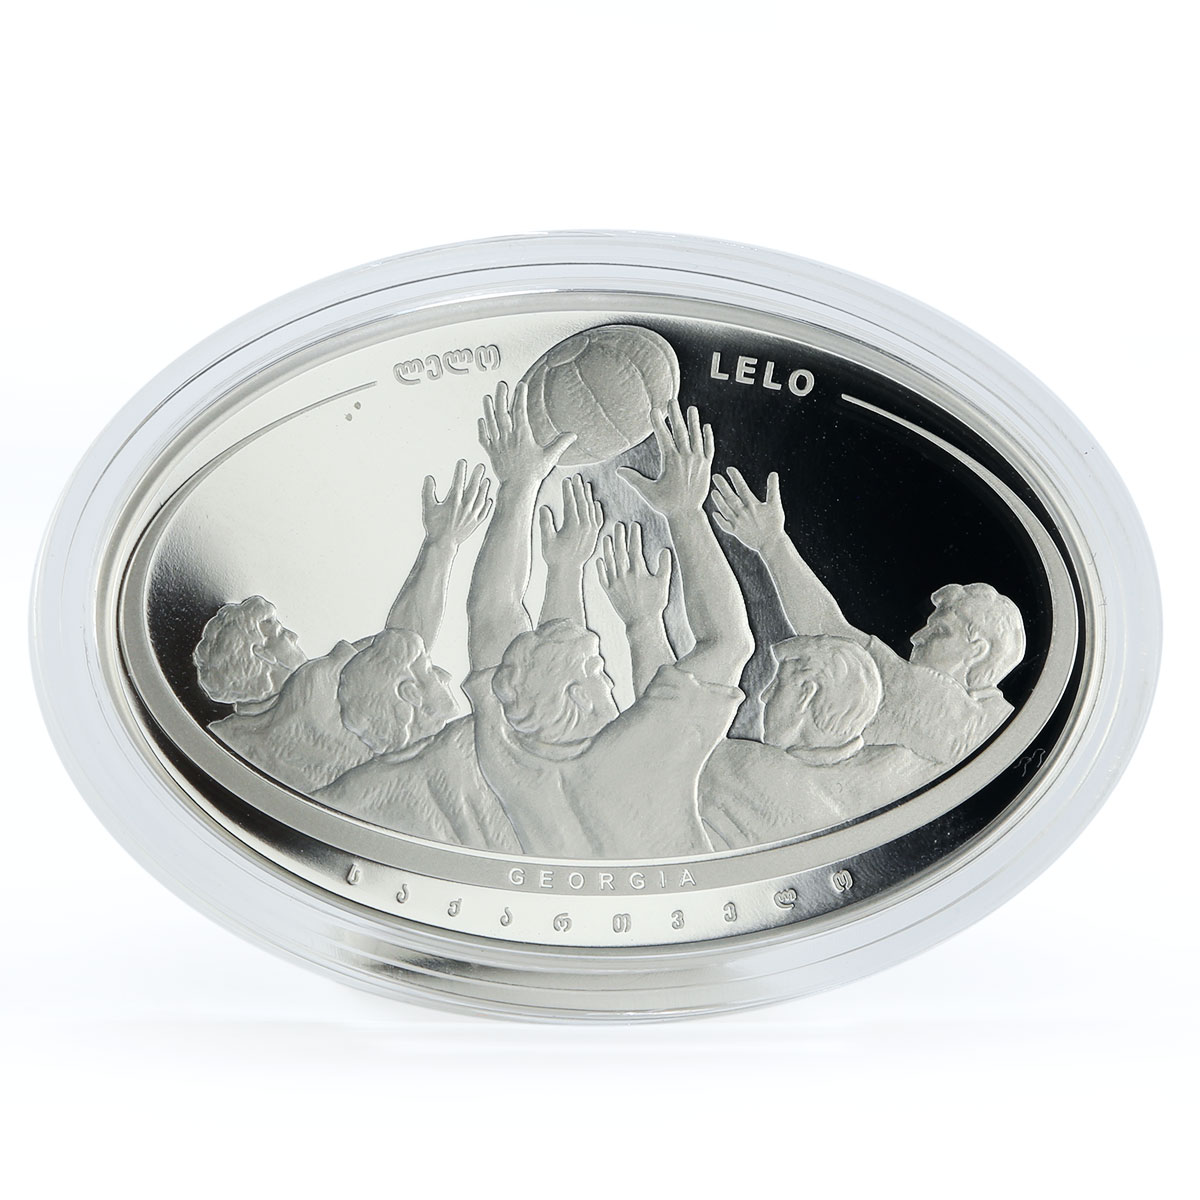 Georgia 5 lari Rugby World Cup proof silver coin 2019